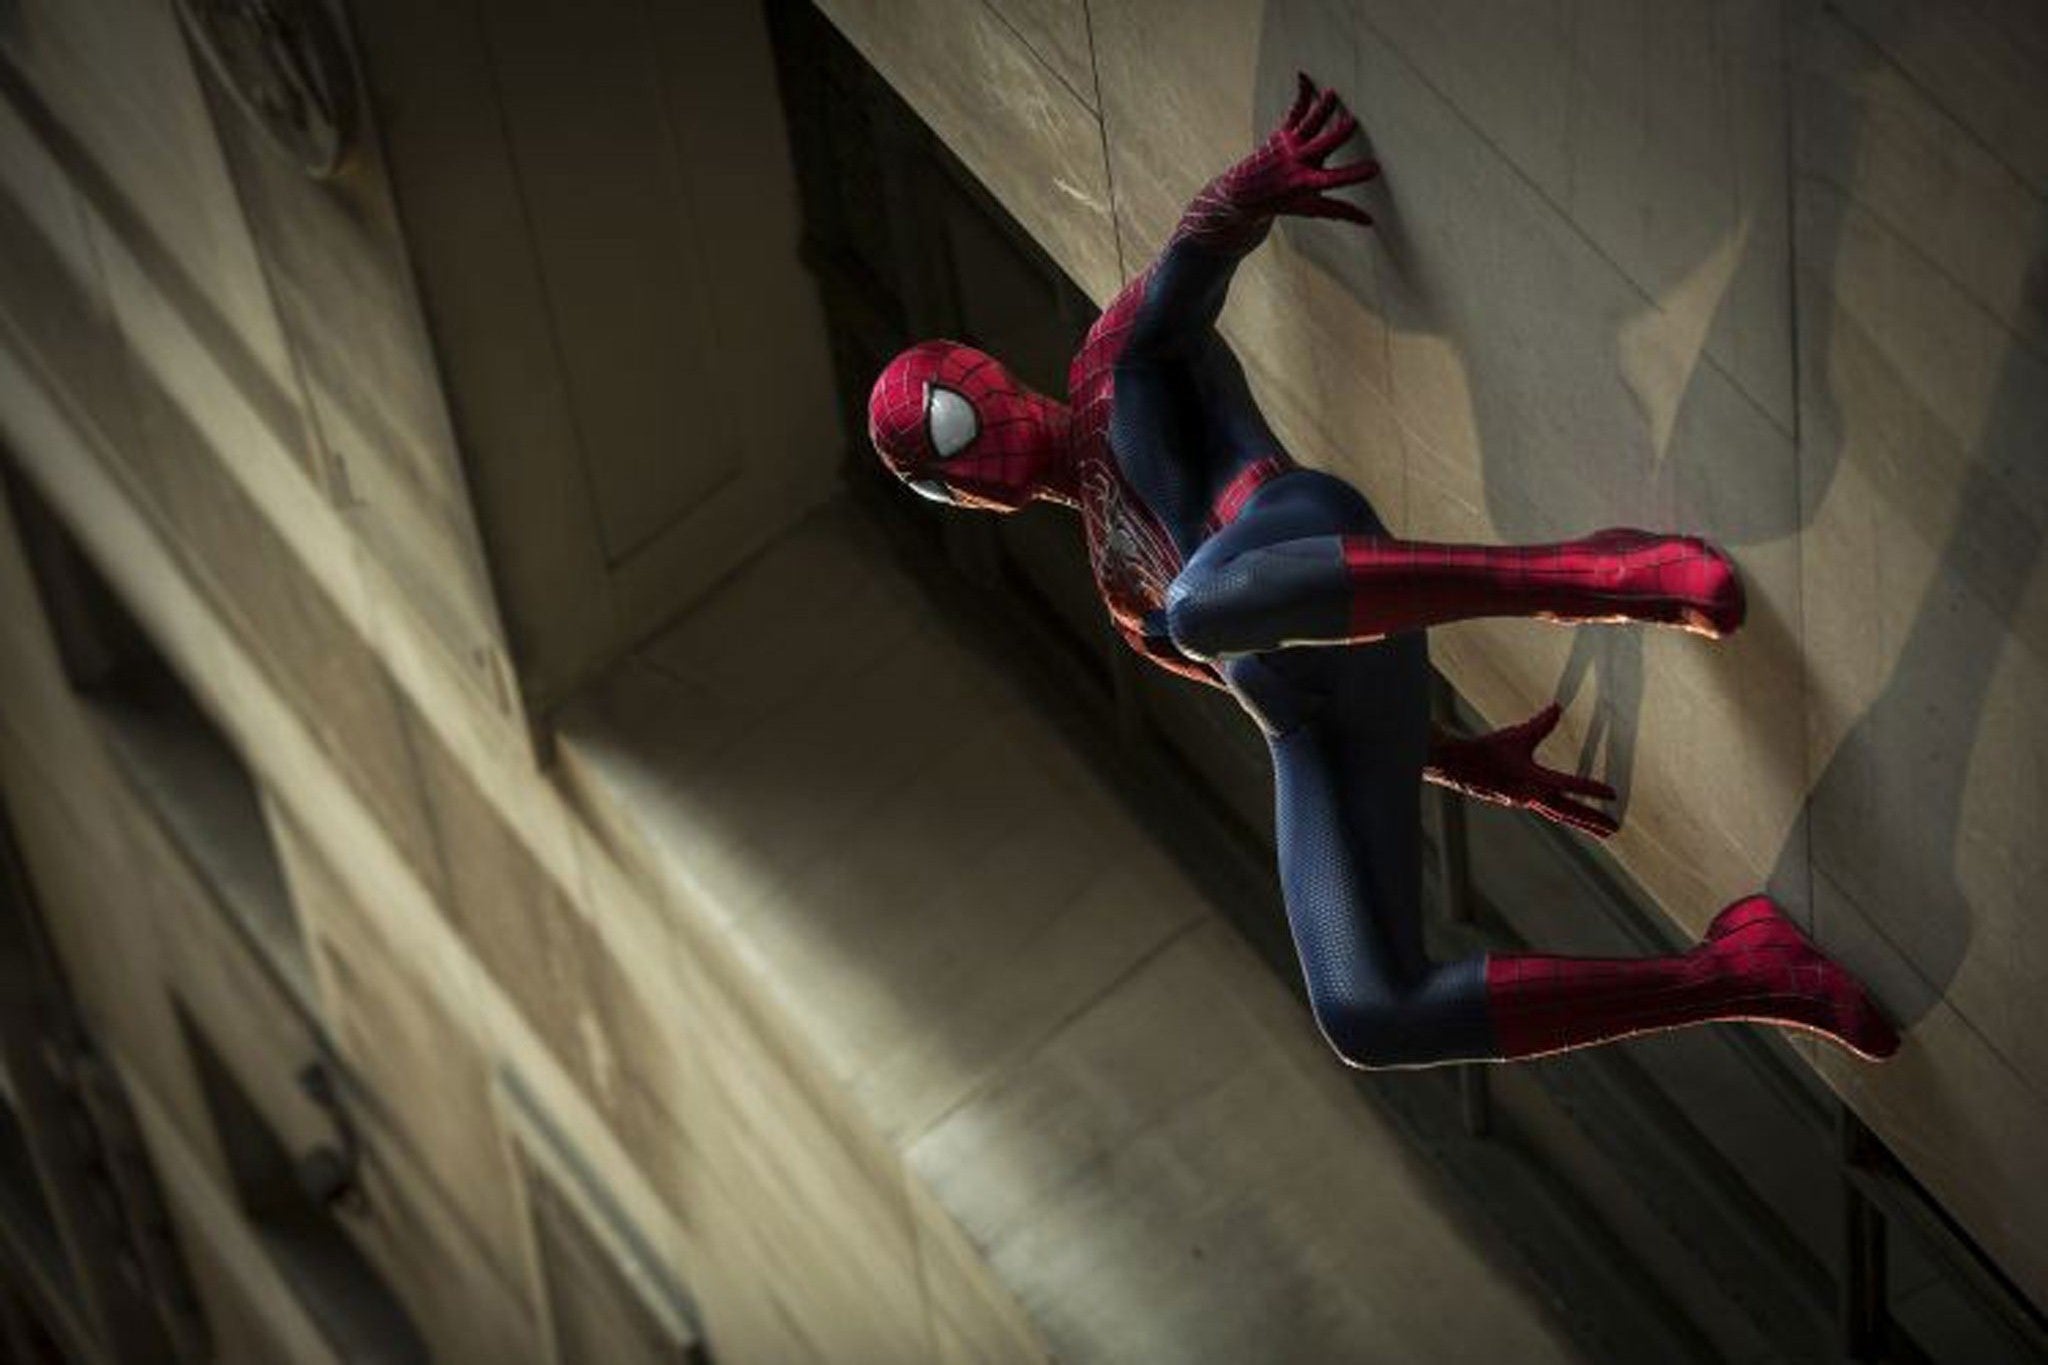 Spin a web to Blinkbox and reel in The Amazing Spiderman 2